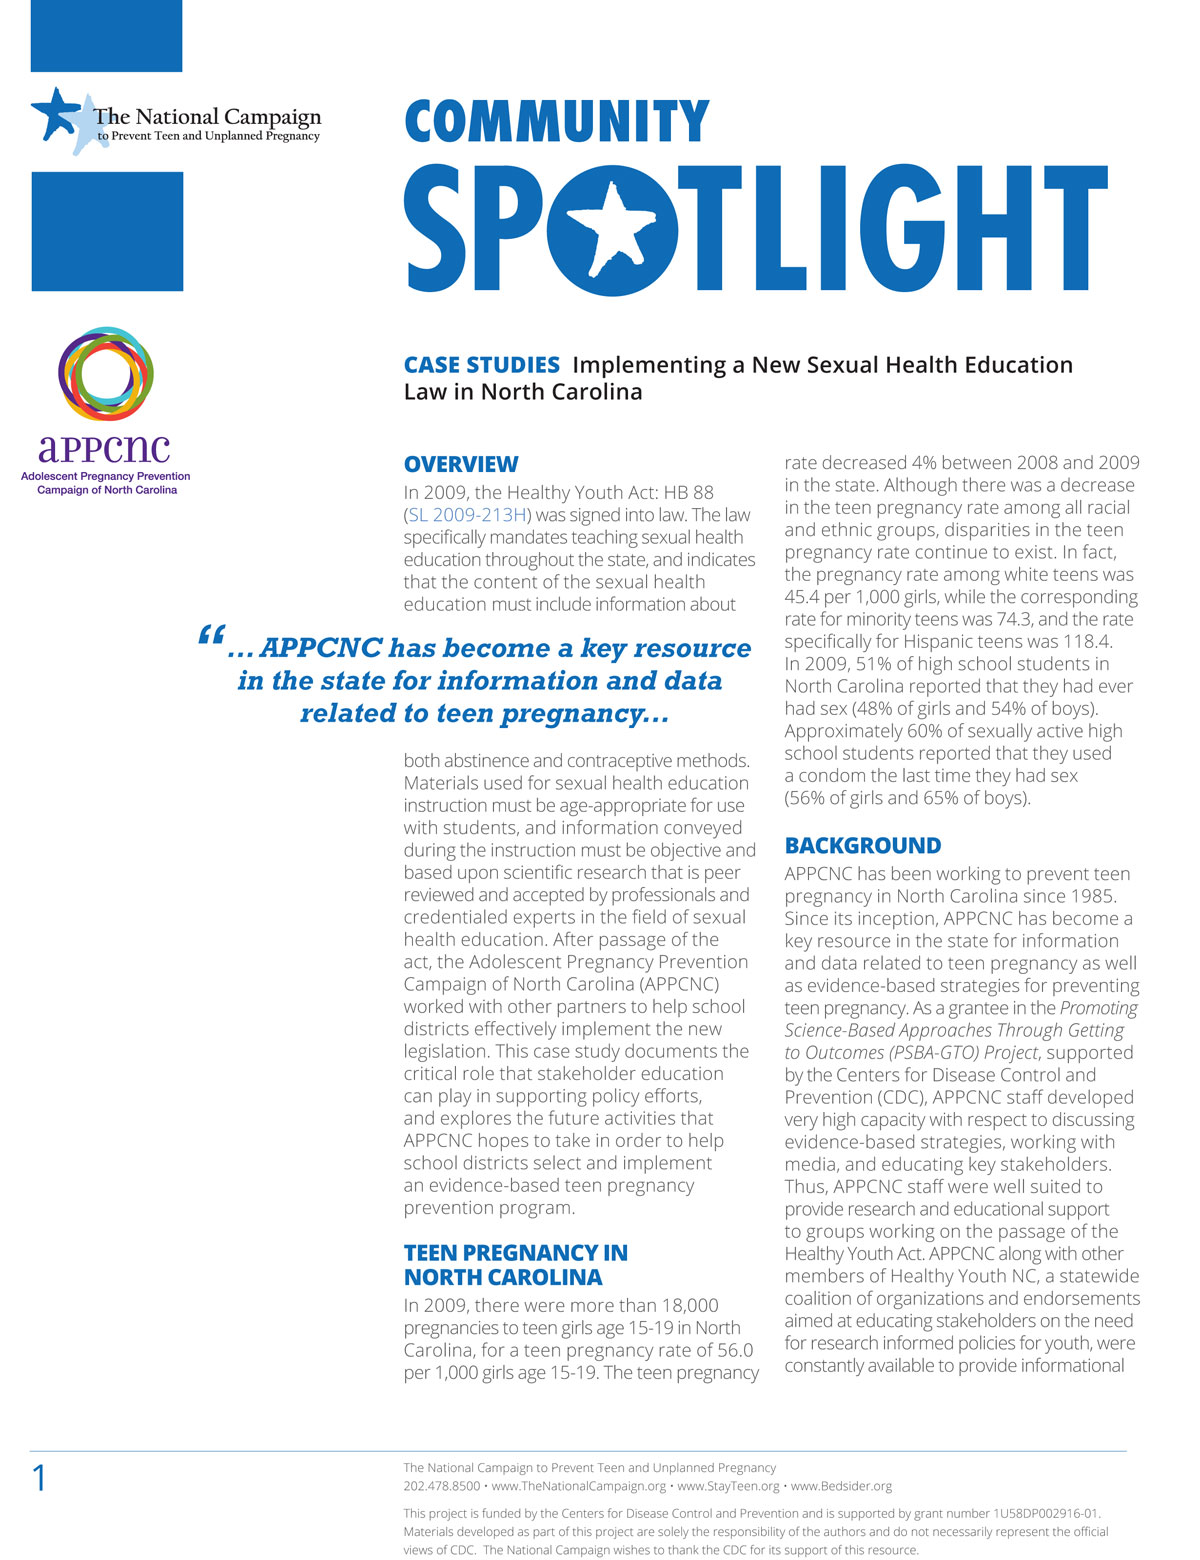 Community Spotlight: CASE STUDIES Implementing a New Sexual Health Education Law in North Carolina